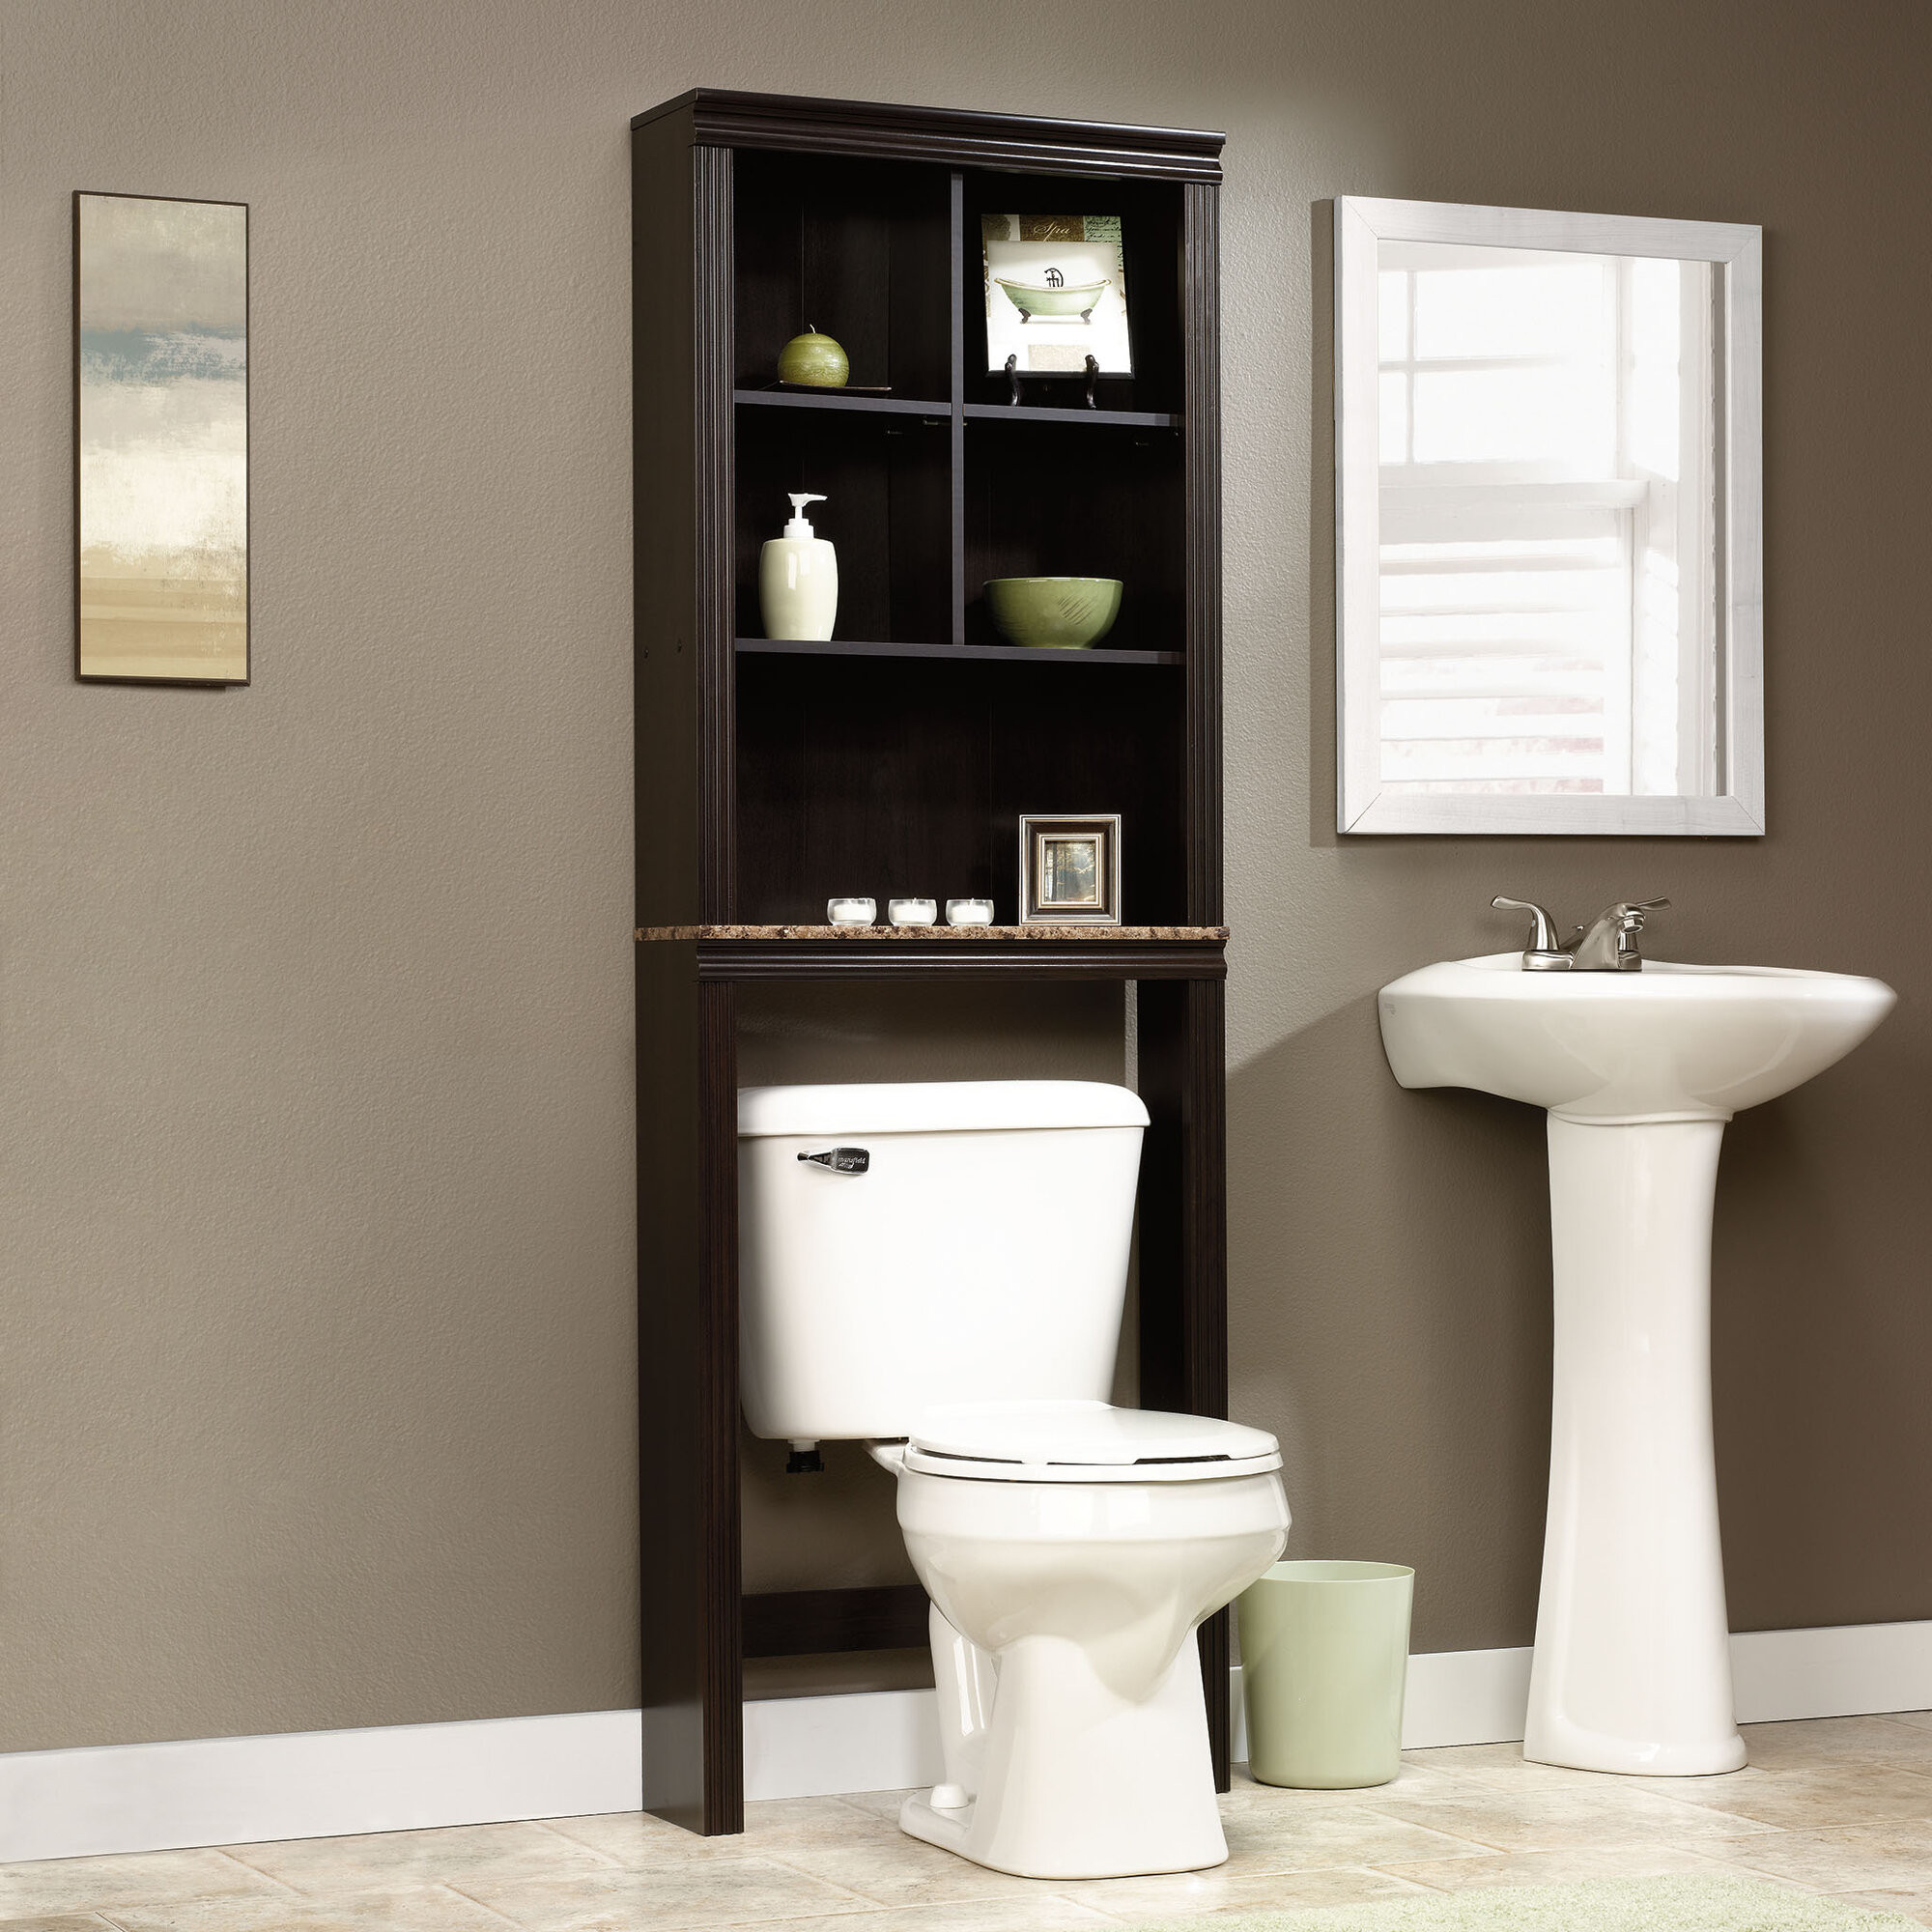 Bathroom Cabinets Over The Toilet
 Over The Toilet Storage Bathroom Space Saver Cubby